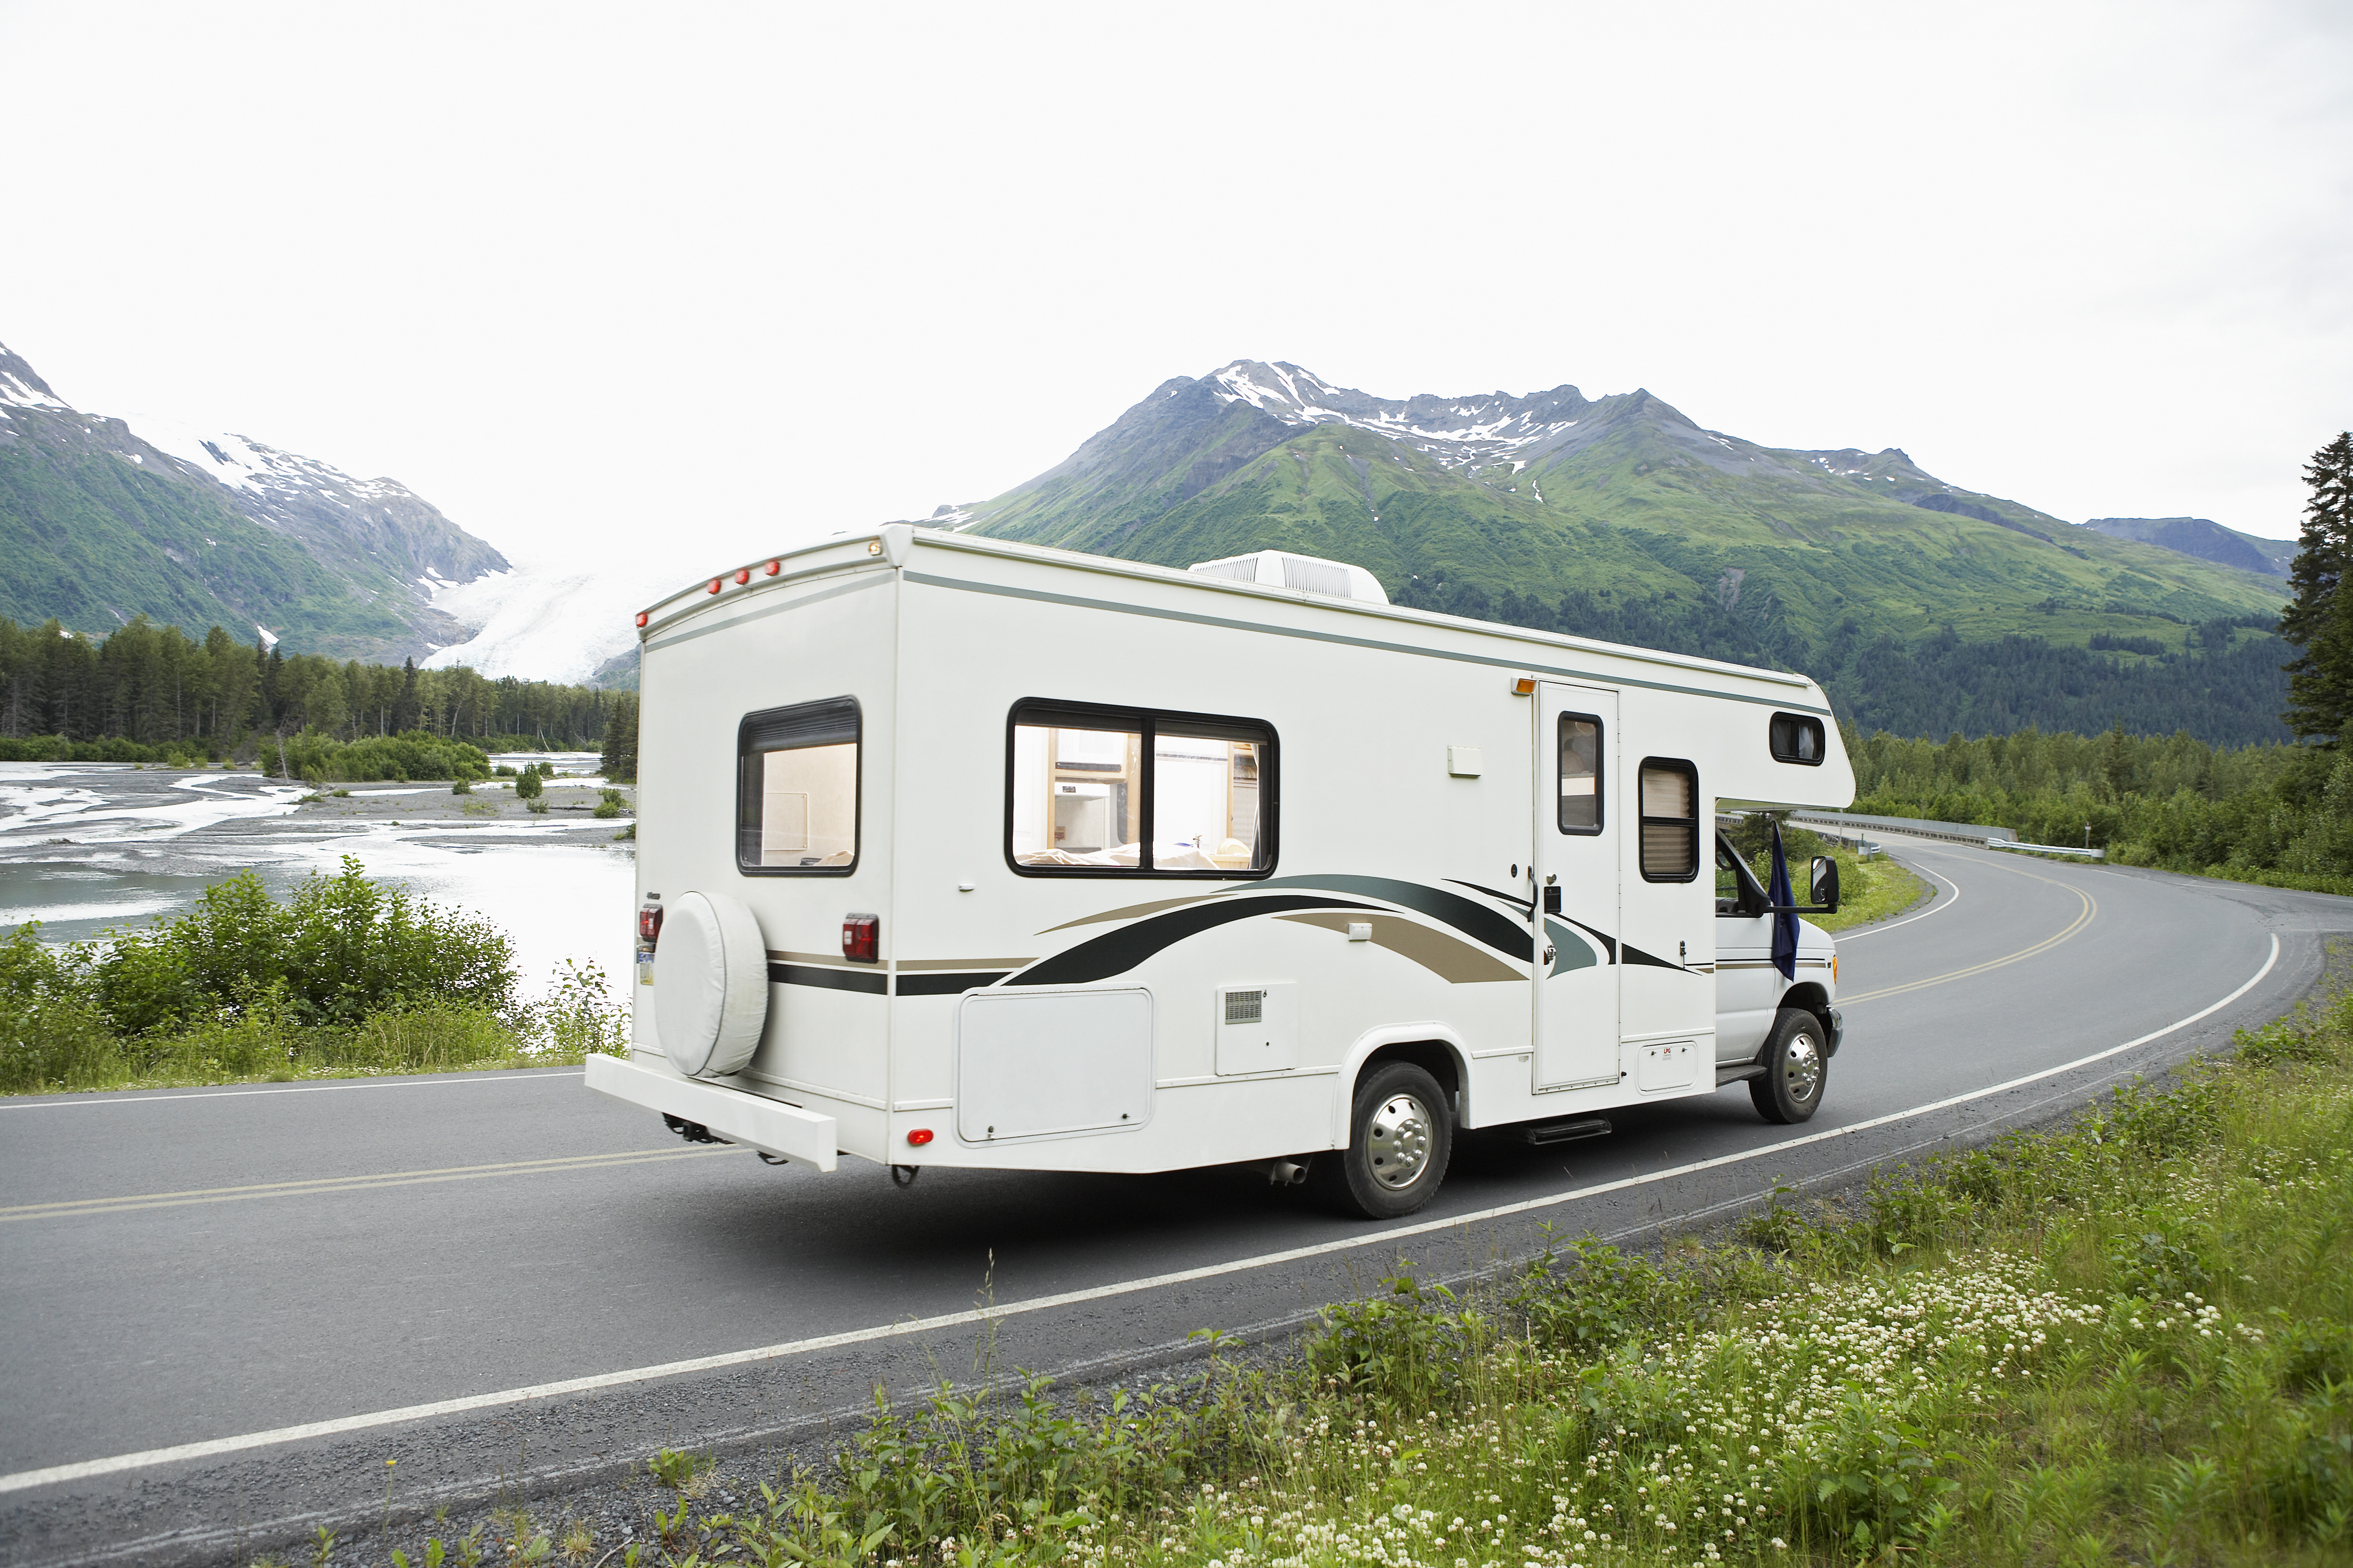 Outstanding opportunity in RV-Repair with growth